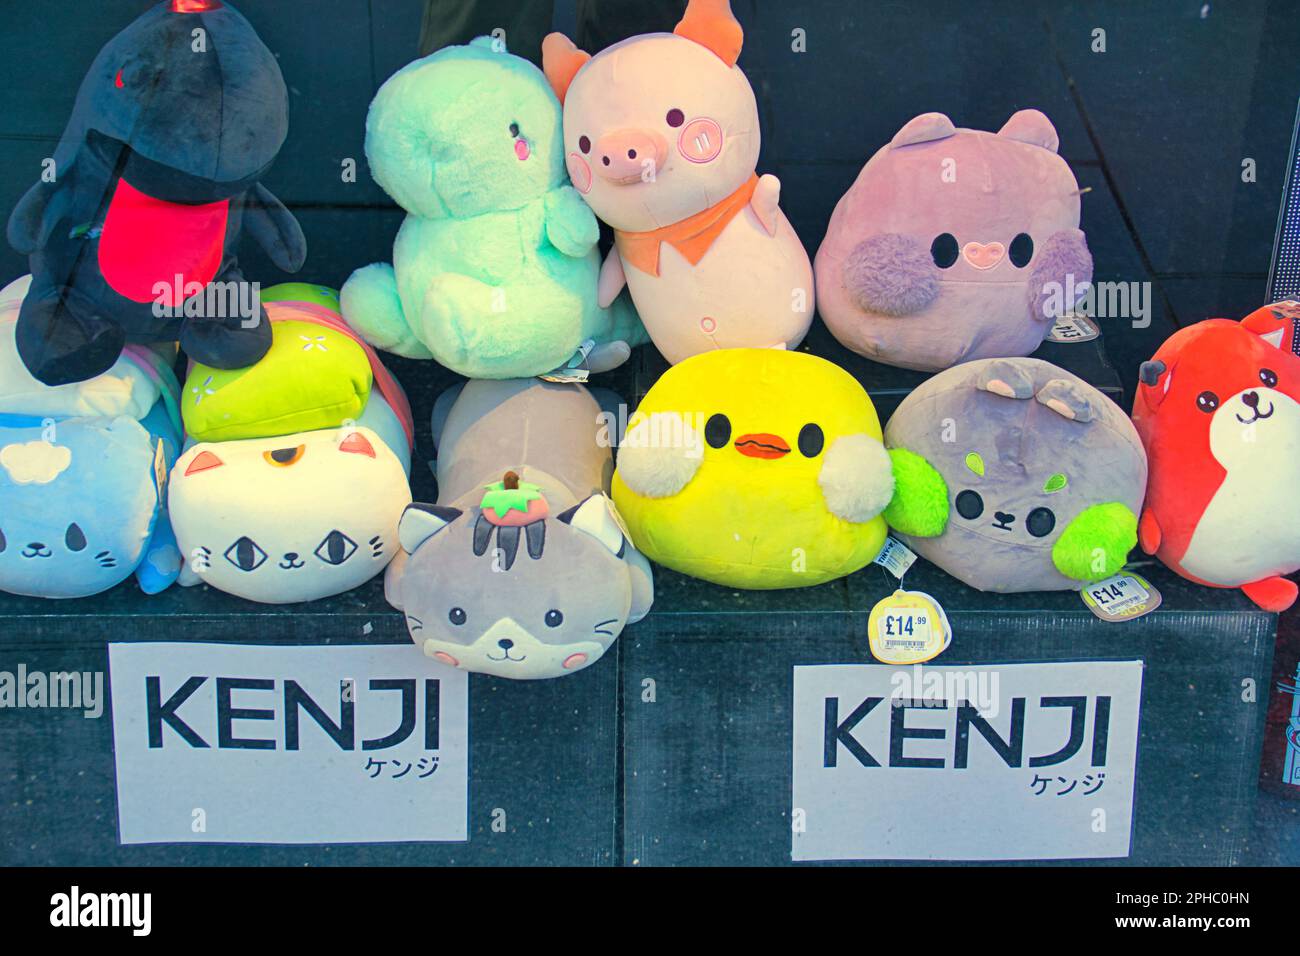 kenji plushies toys in shop window with sign Japanese Stock Photo